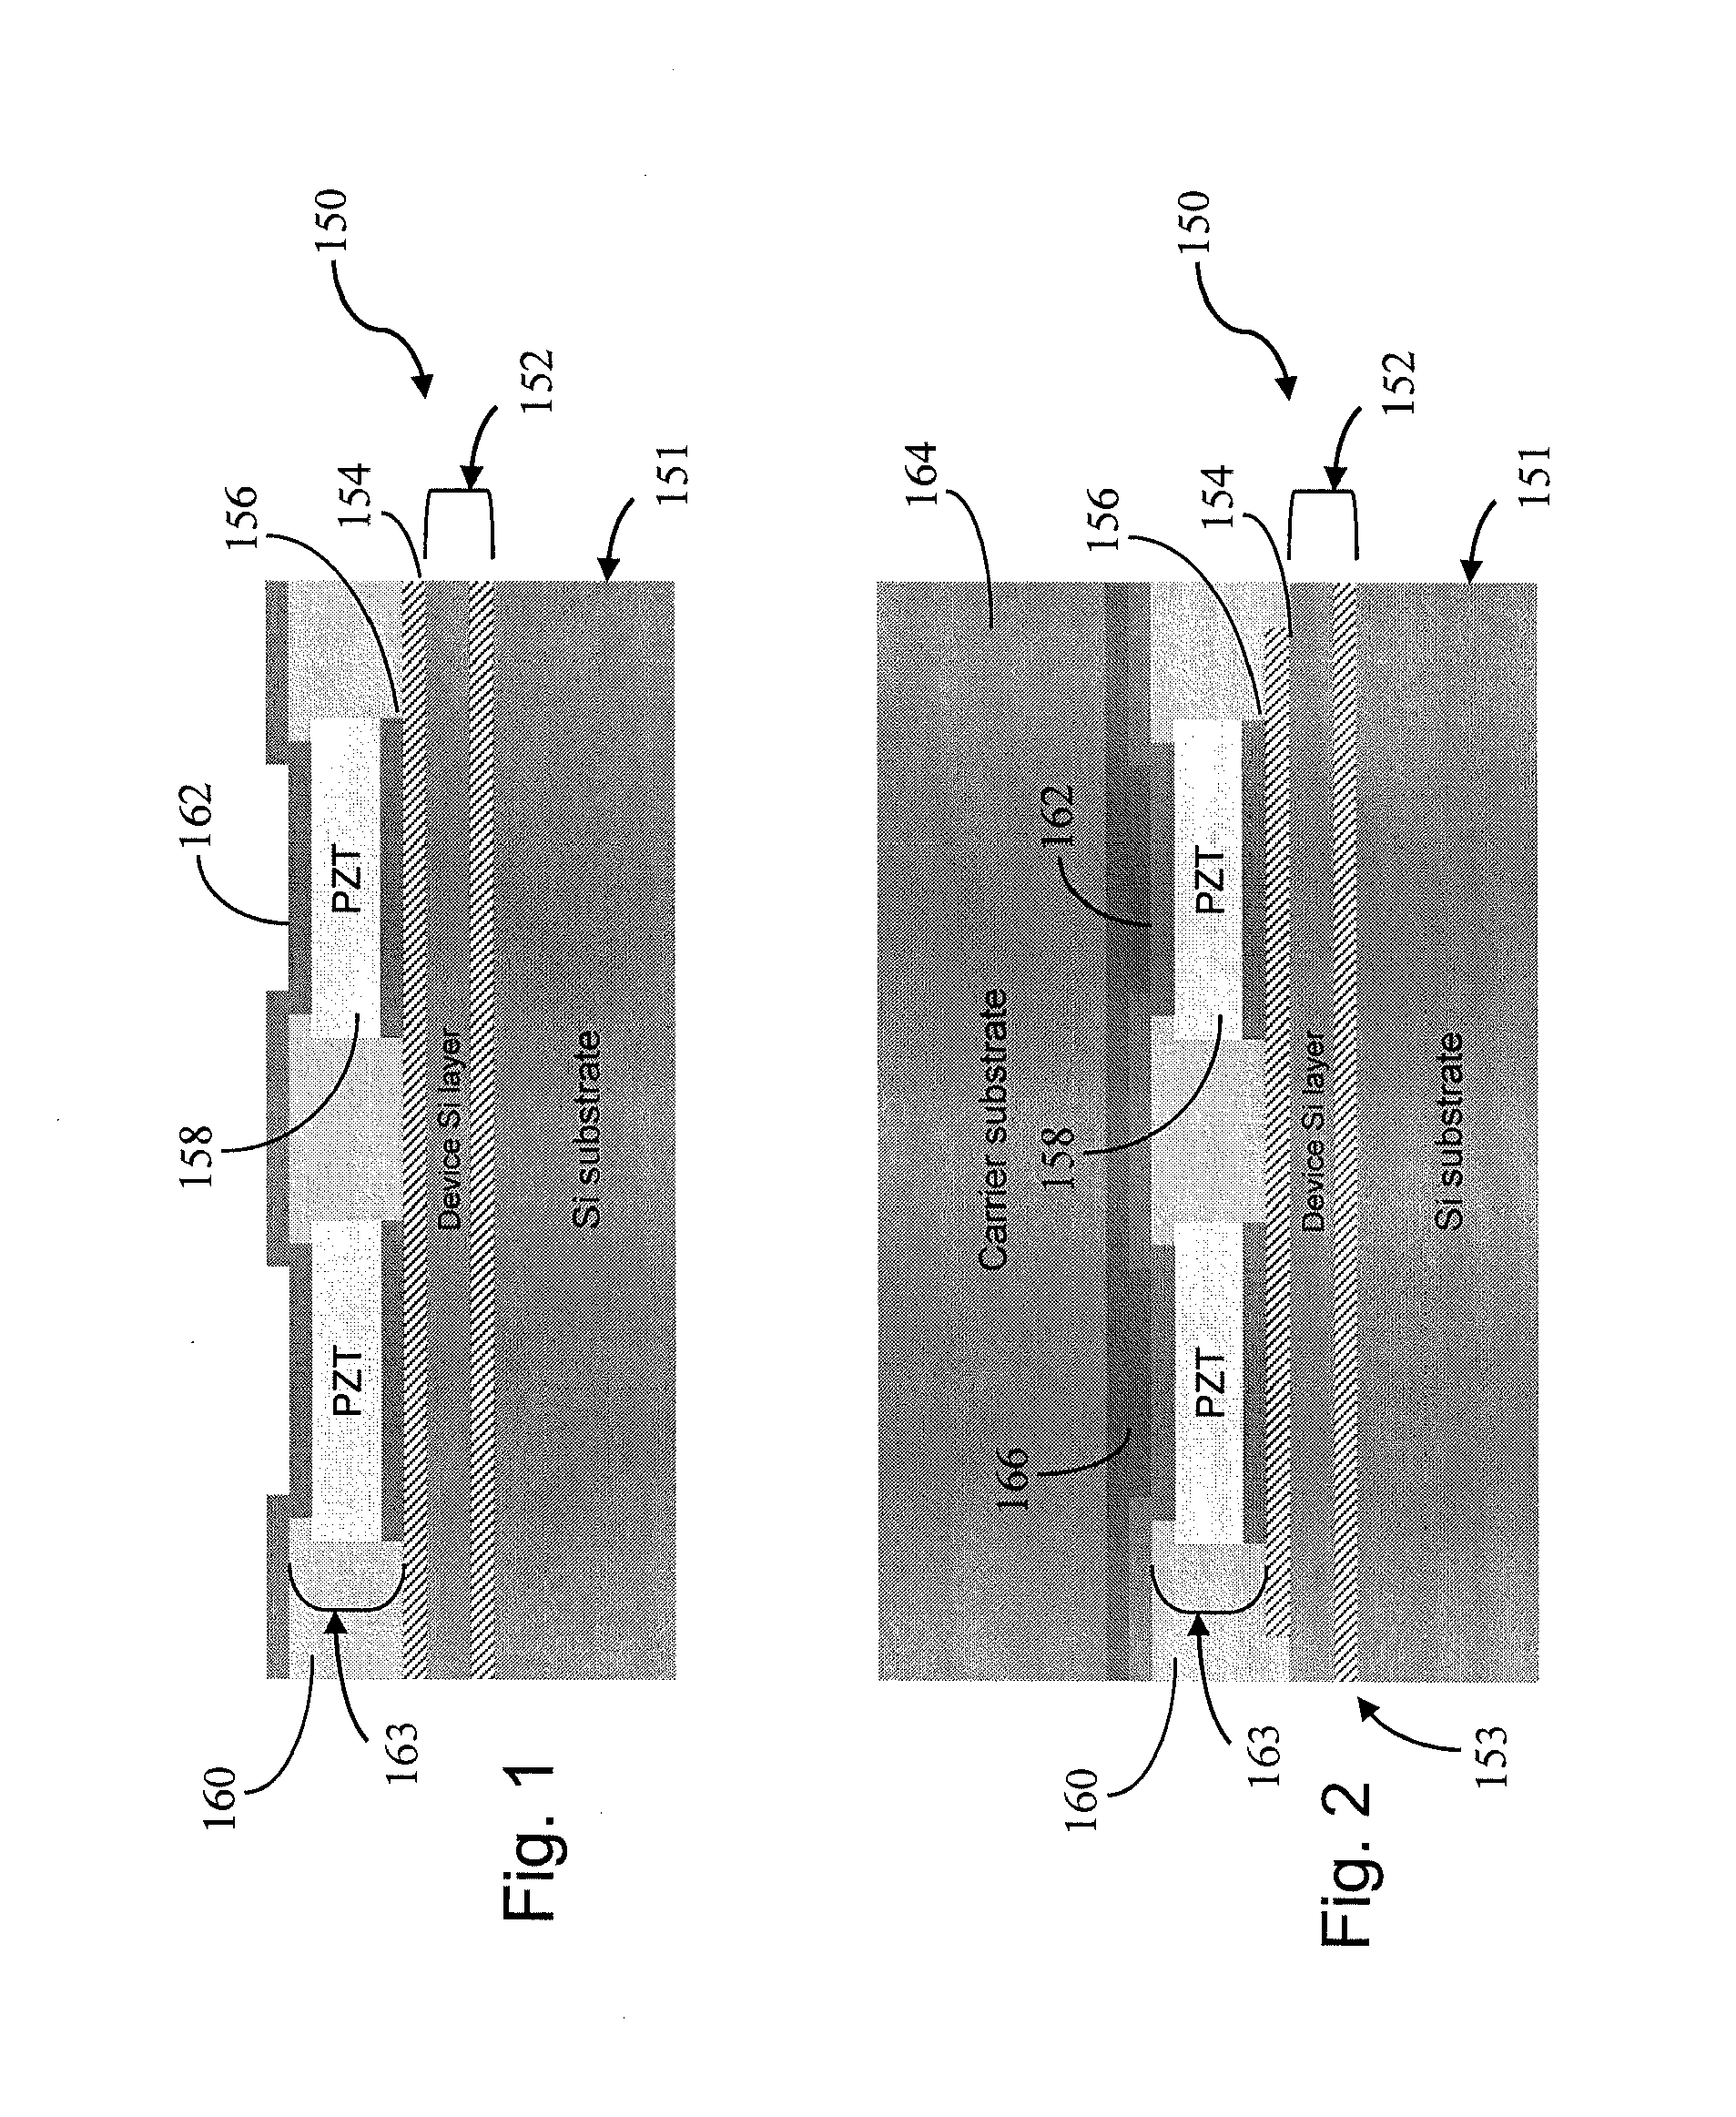 Methods for forming piezoelectric ultrasonic transducers, and associated apparatuses